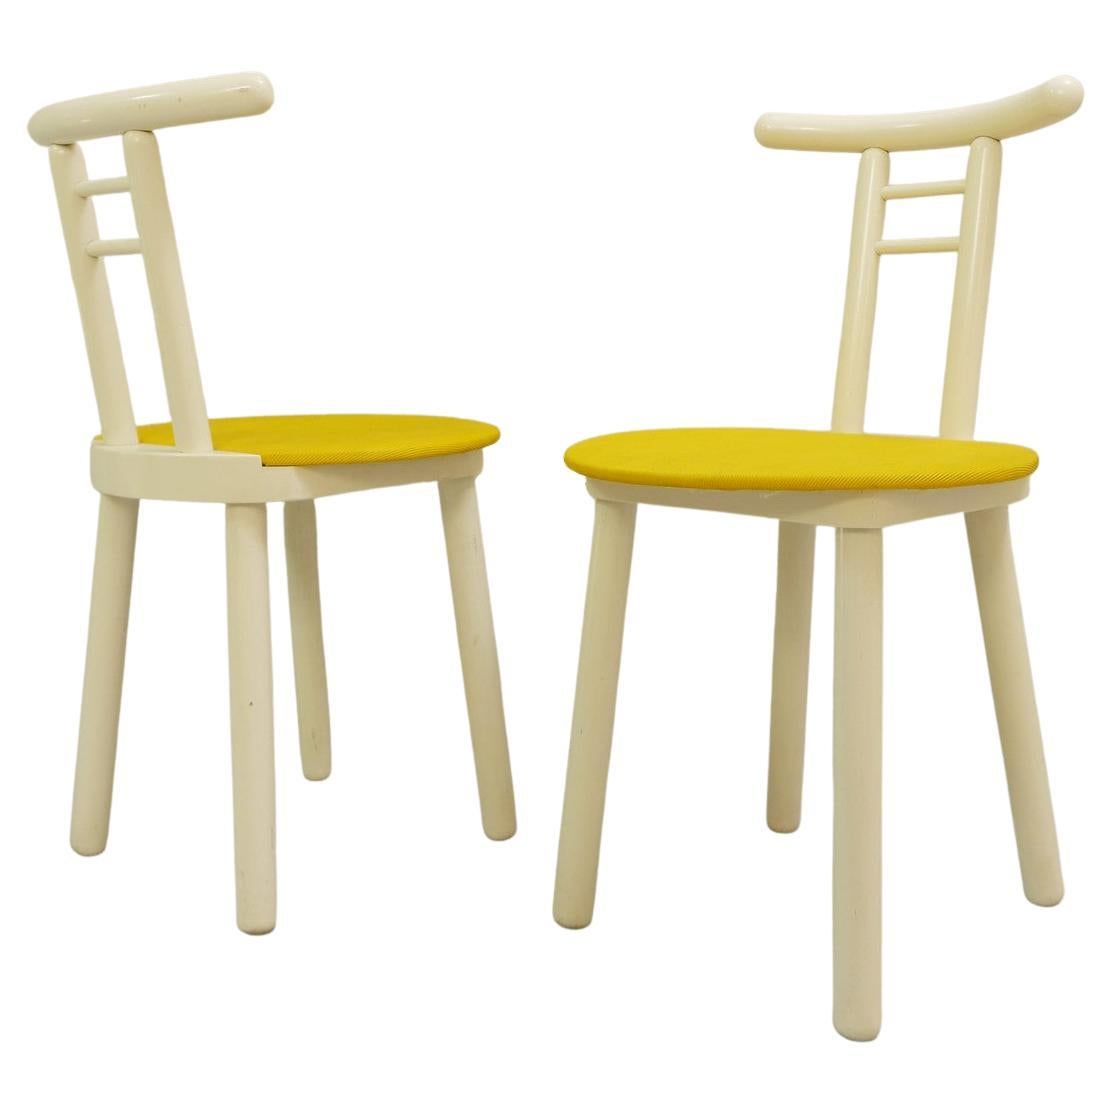 Pair of Italian White Lacquered Wooden Chairs